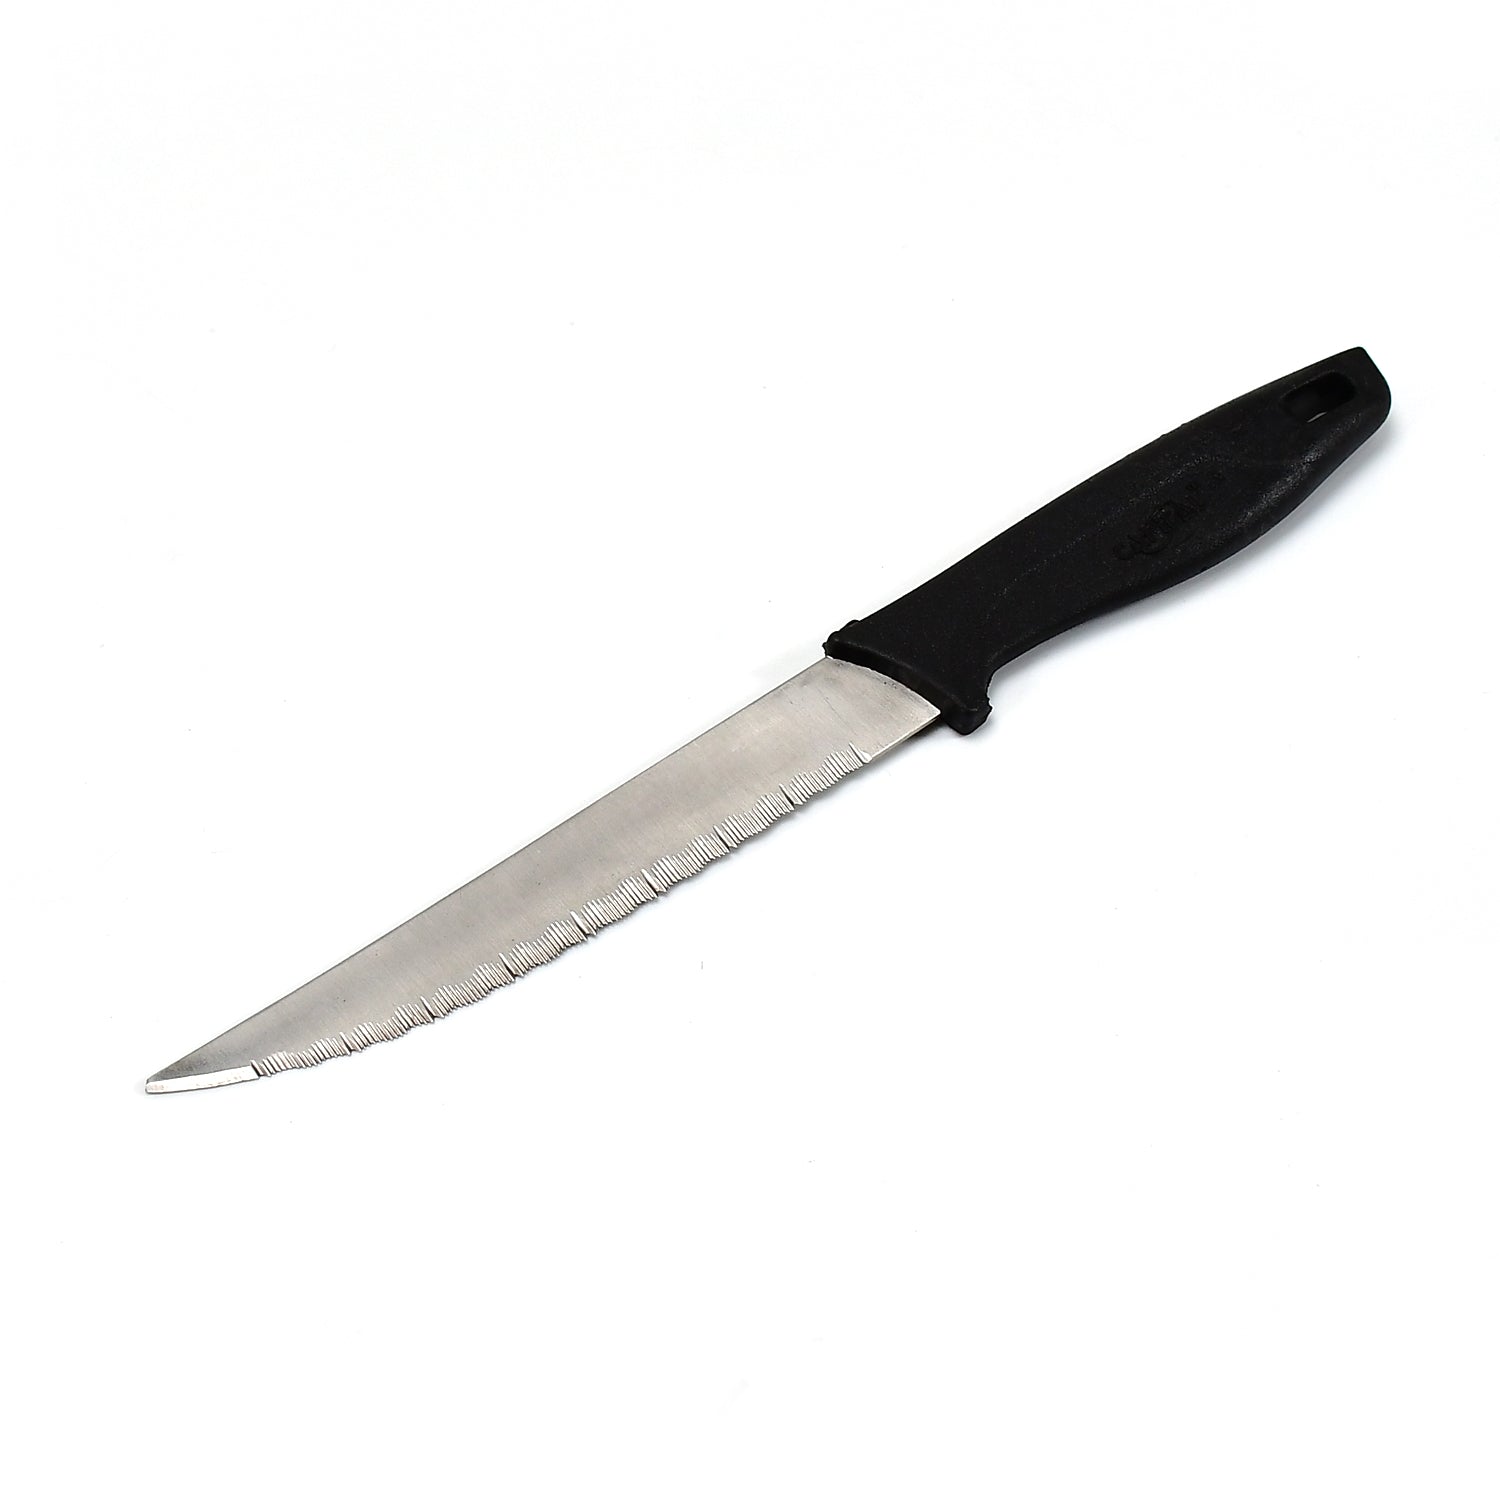 2373 Stainless Steel knife and Kitchen Knife with Black Grip Handle. 